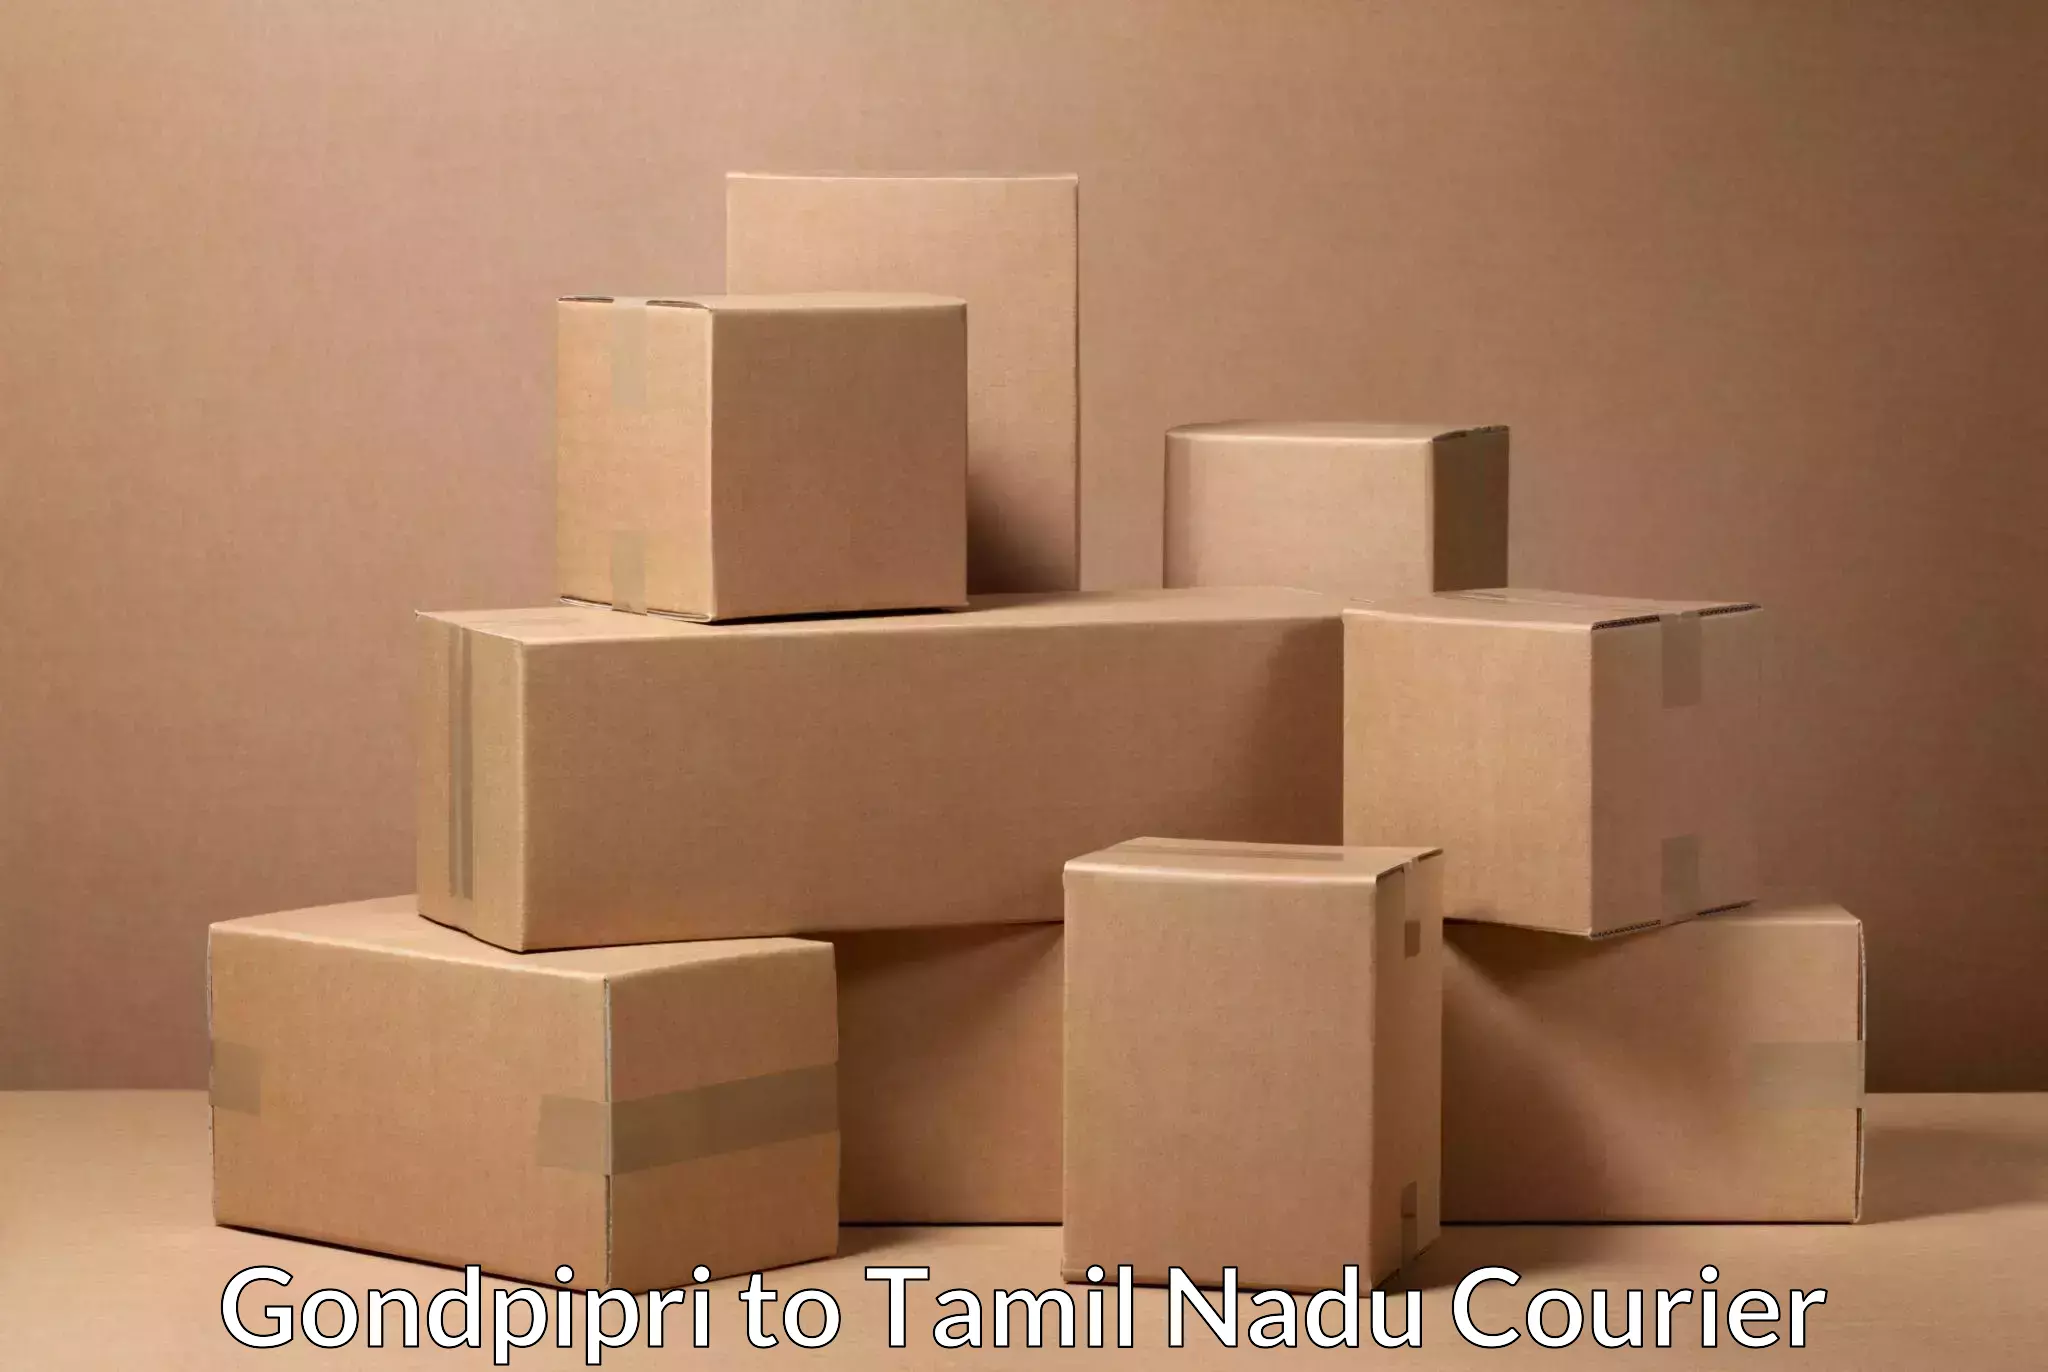 Round-the-clock parcel delivery Gondpipri to Saveetha Institute of Medical and Technical Sciences Chennai